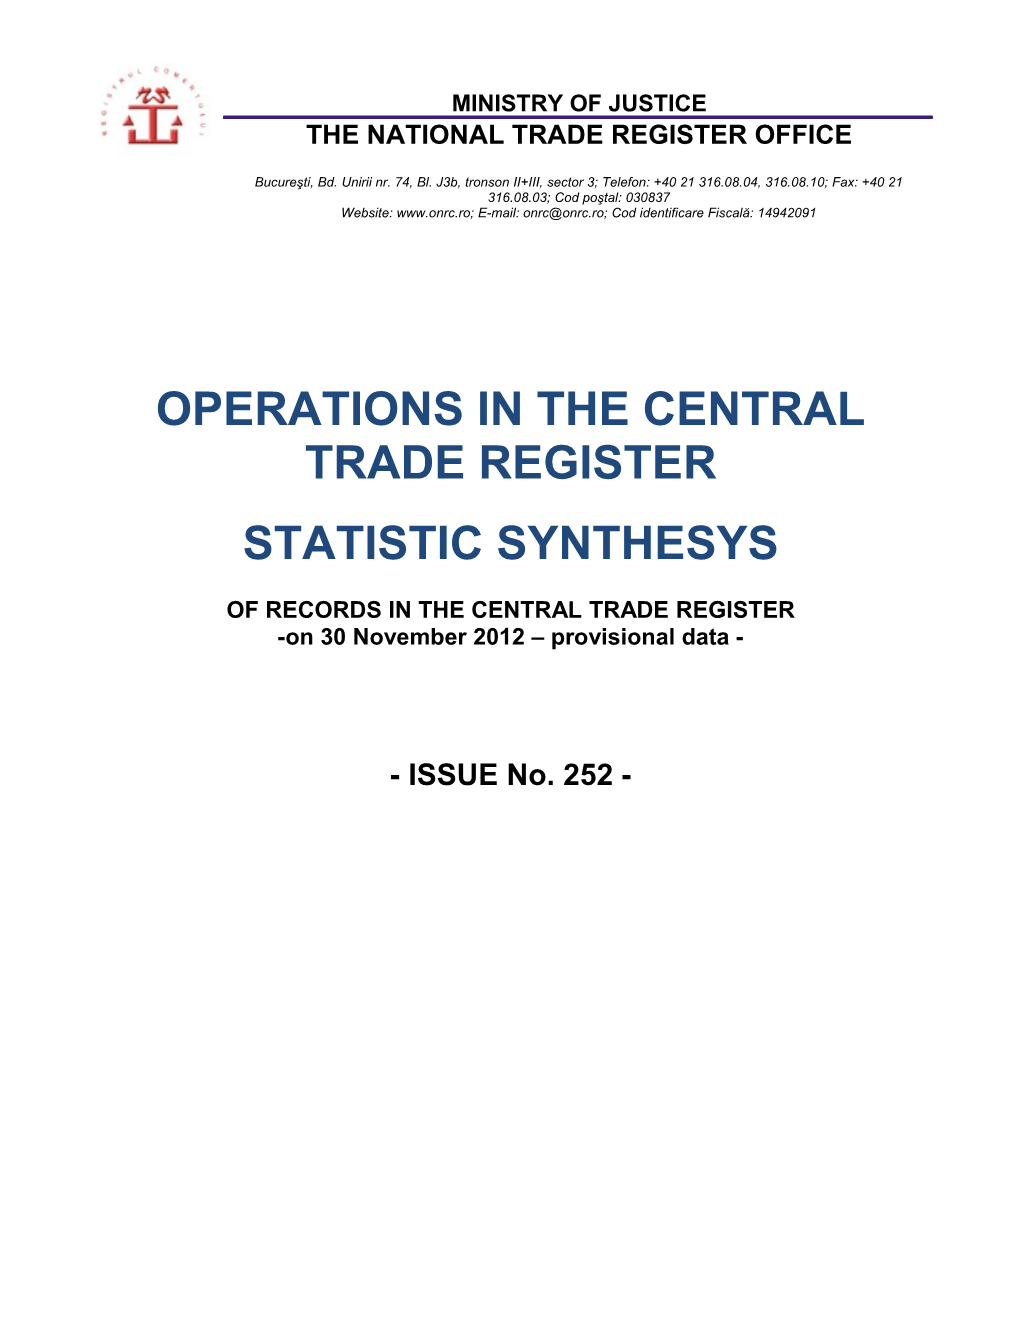 Operations Such As Incorporation of Trading Companies, Submission of Changes, and Strike-Off